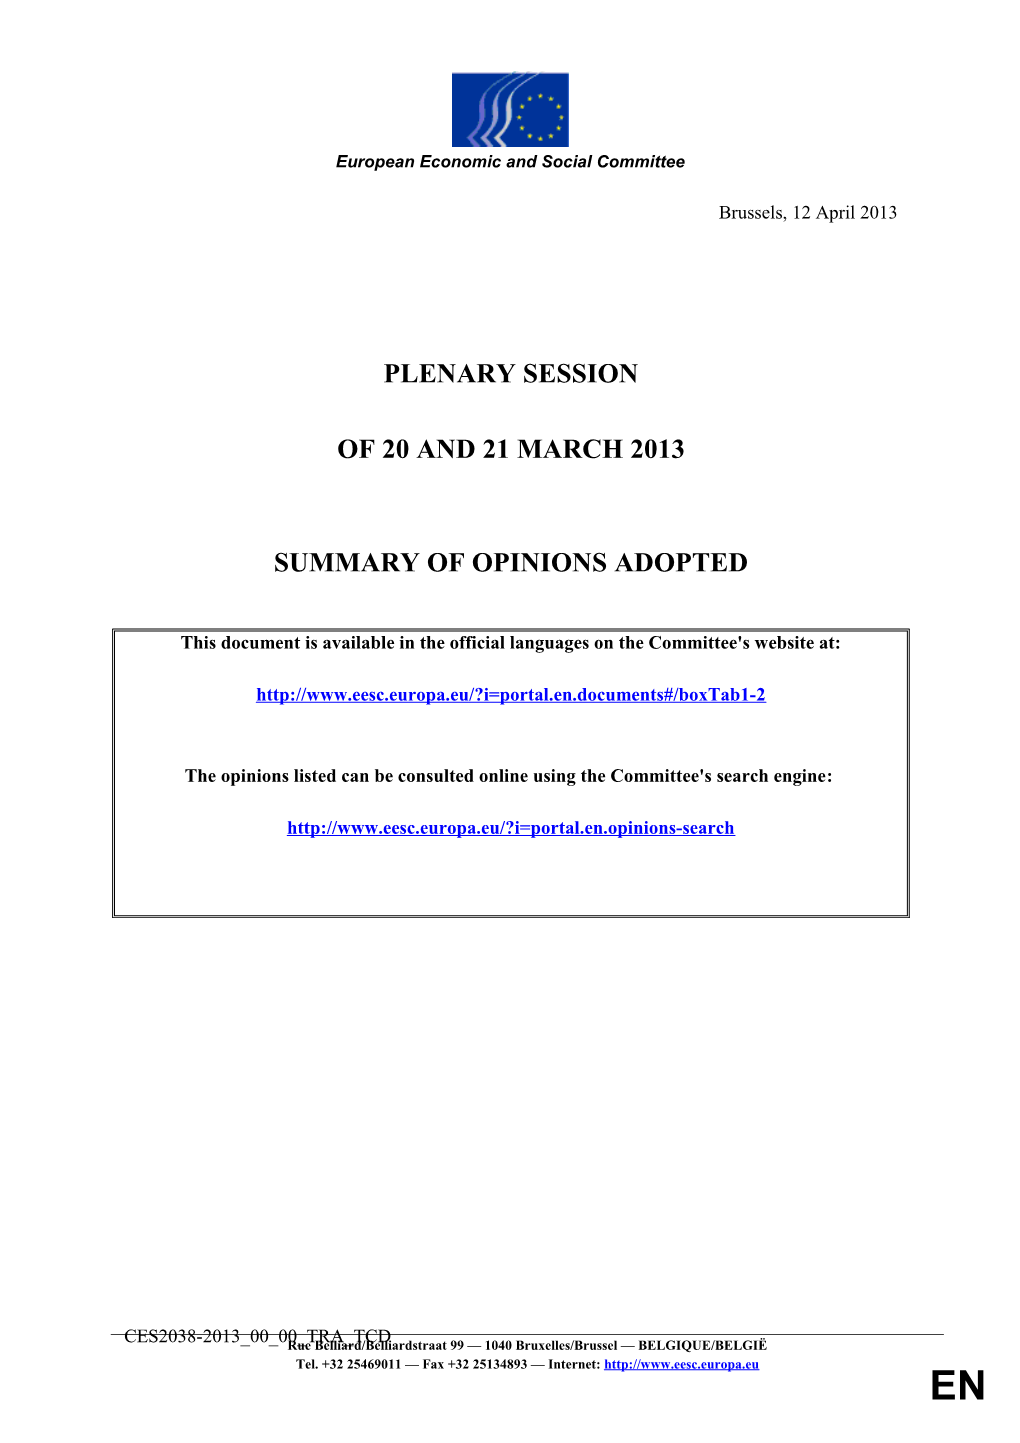 SUMMARY of OPINIONS ADOPTED - Plenary Session March